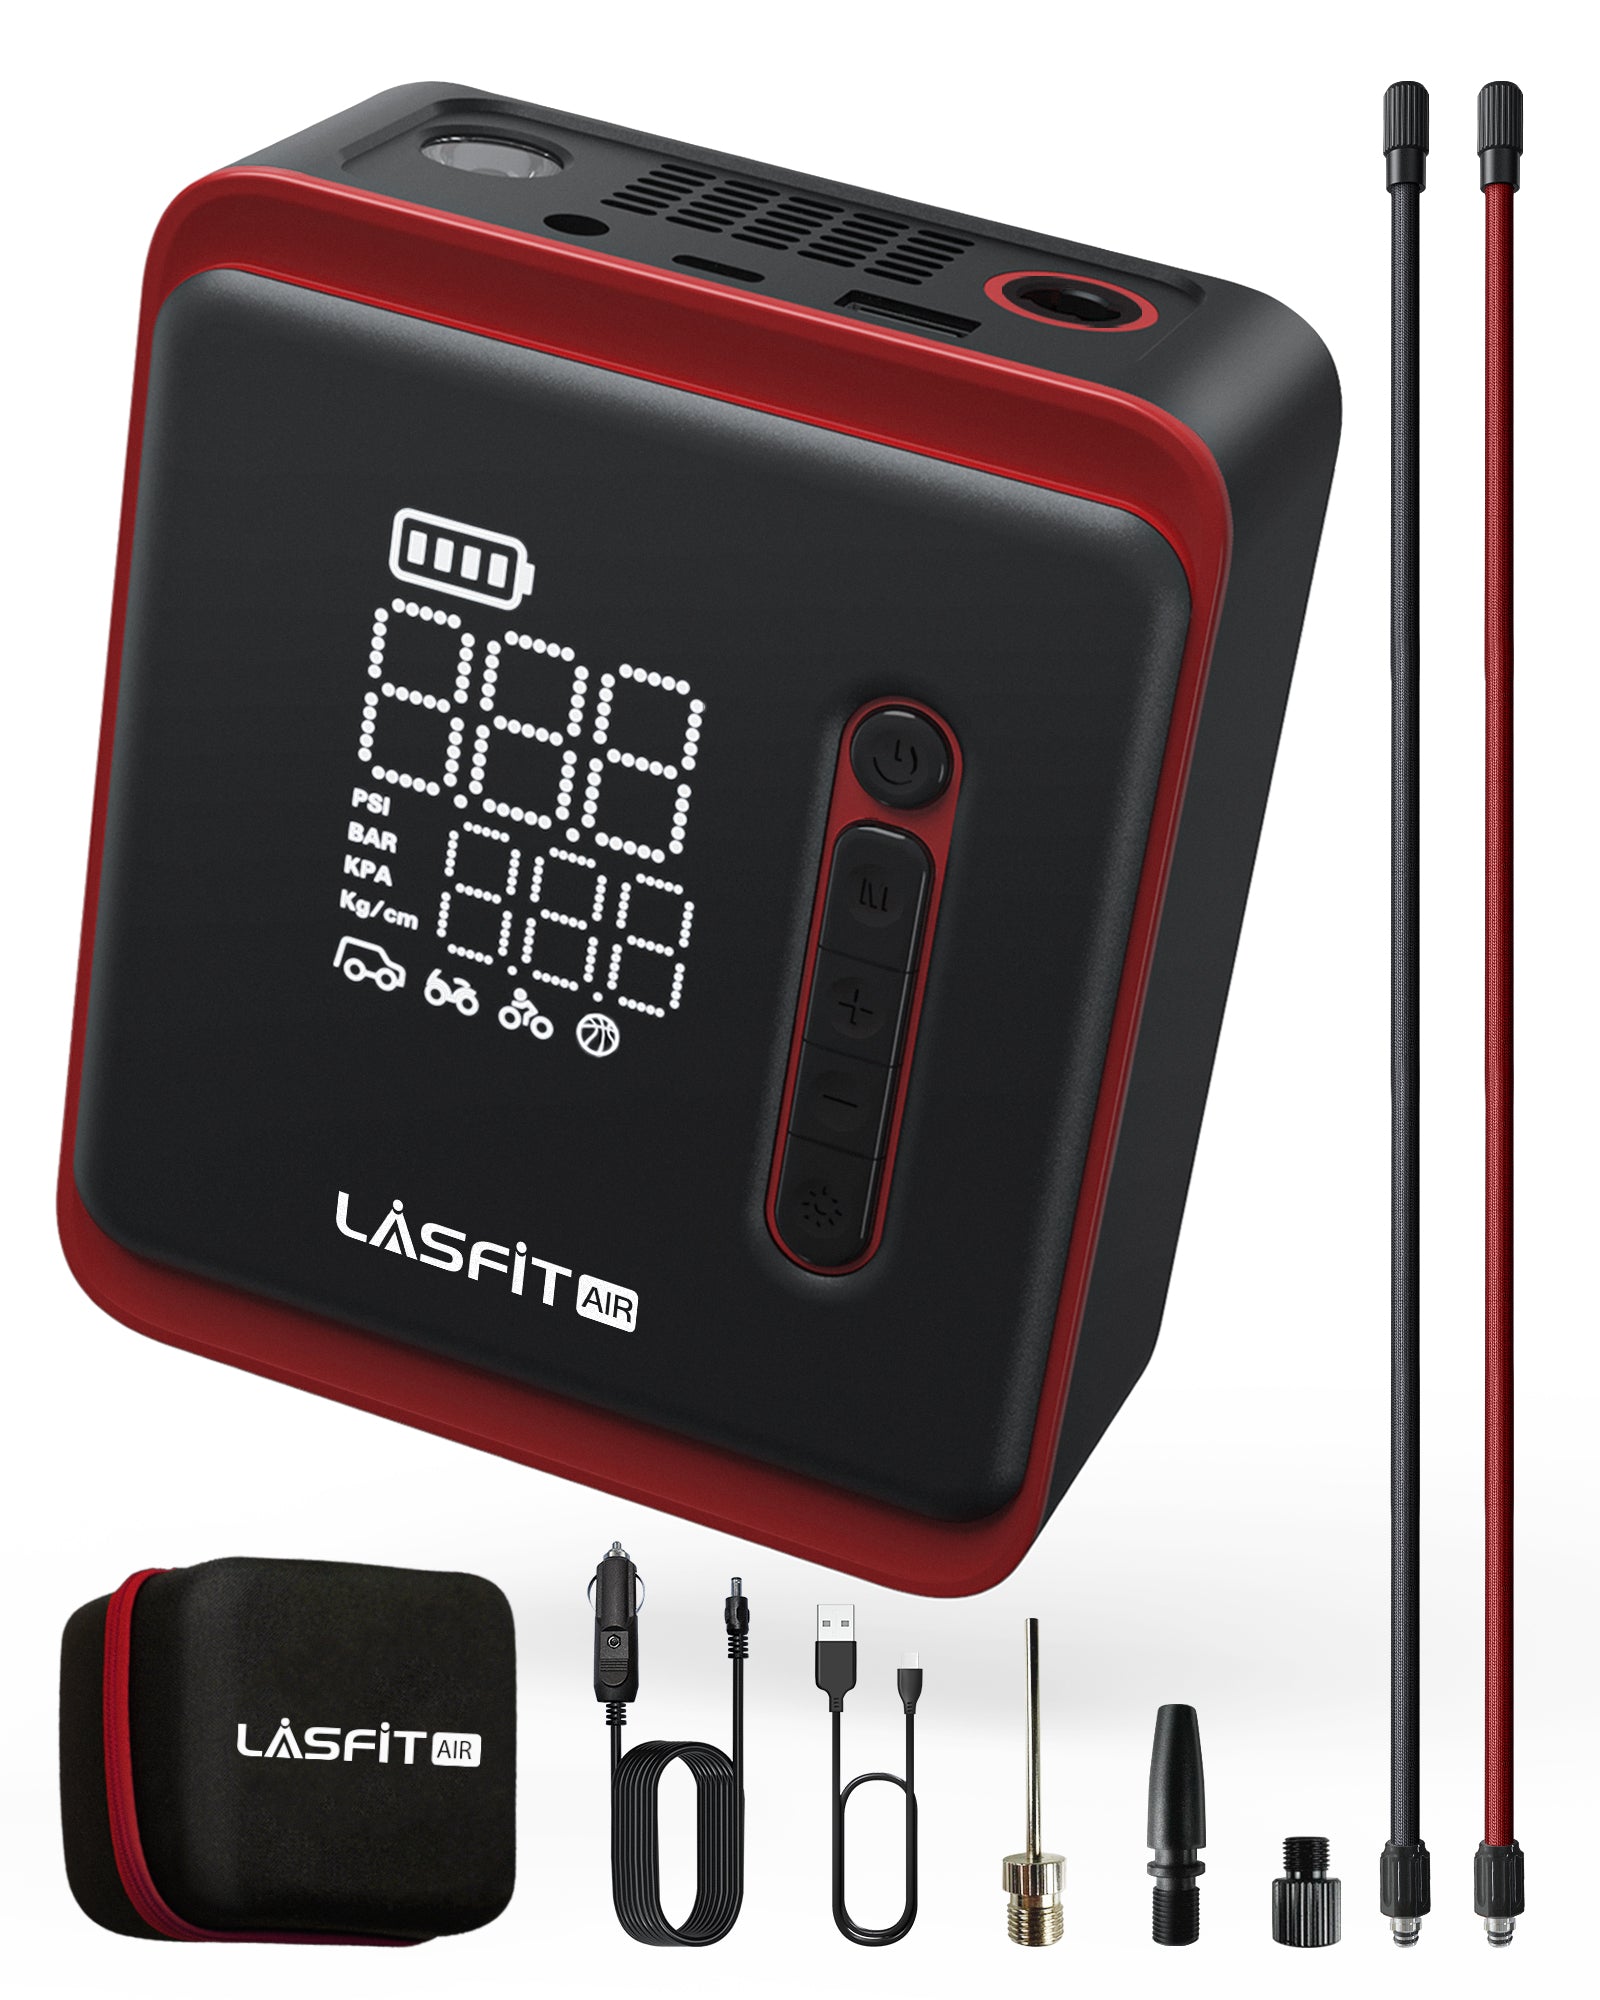 LASFIT AIR CR1 40s Fast Tire Inflator for Cars: Portable & Cordless, Inflate with Ease, Anywhere You Go!